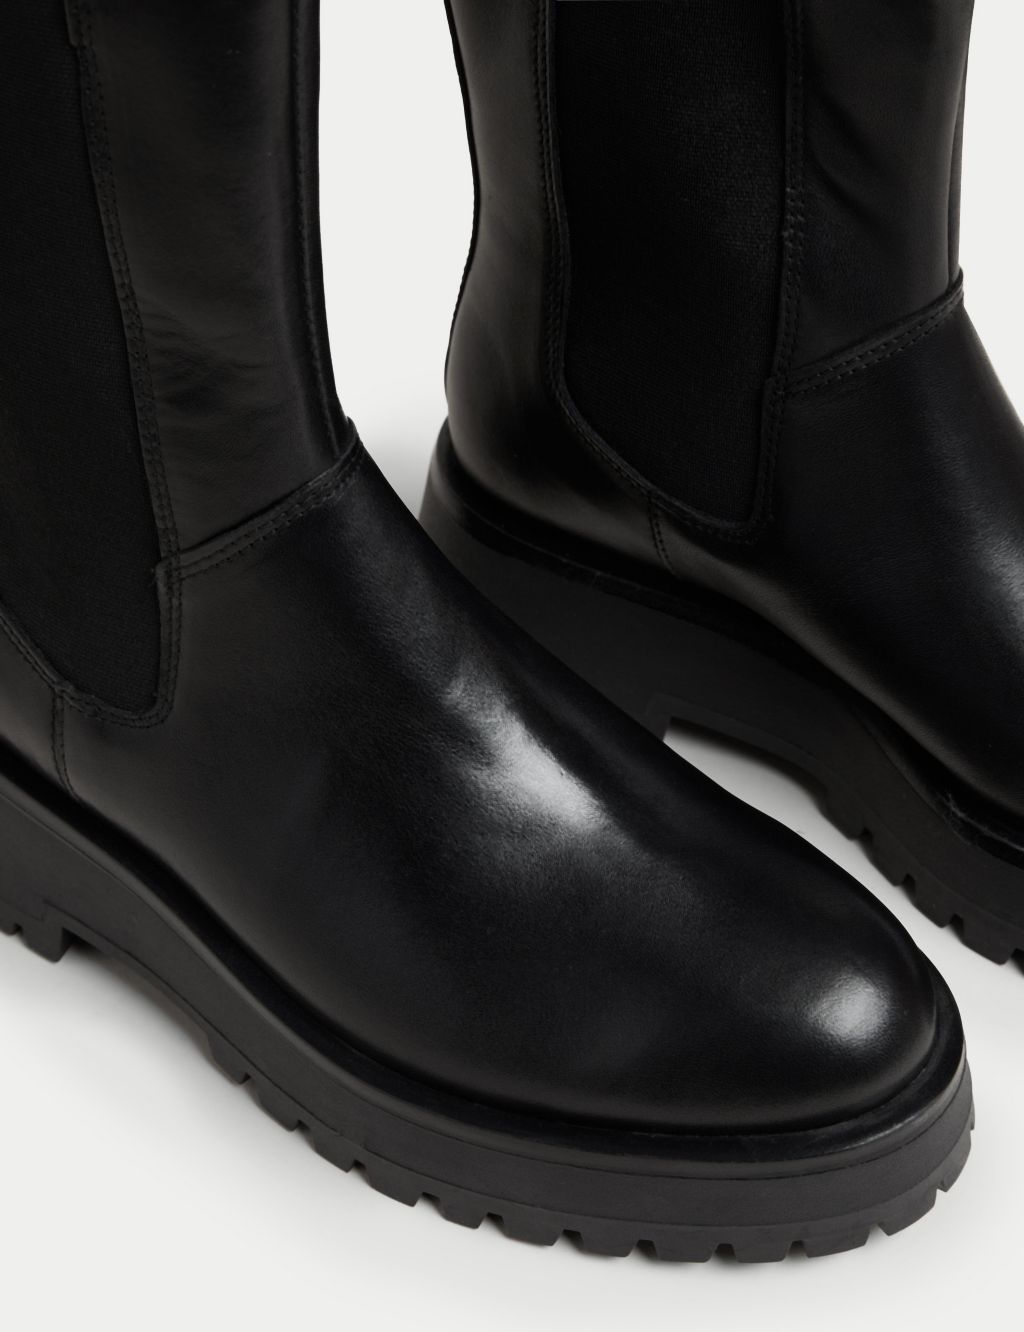 Leather Chelsea Flatform Ankle Boots image 2